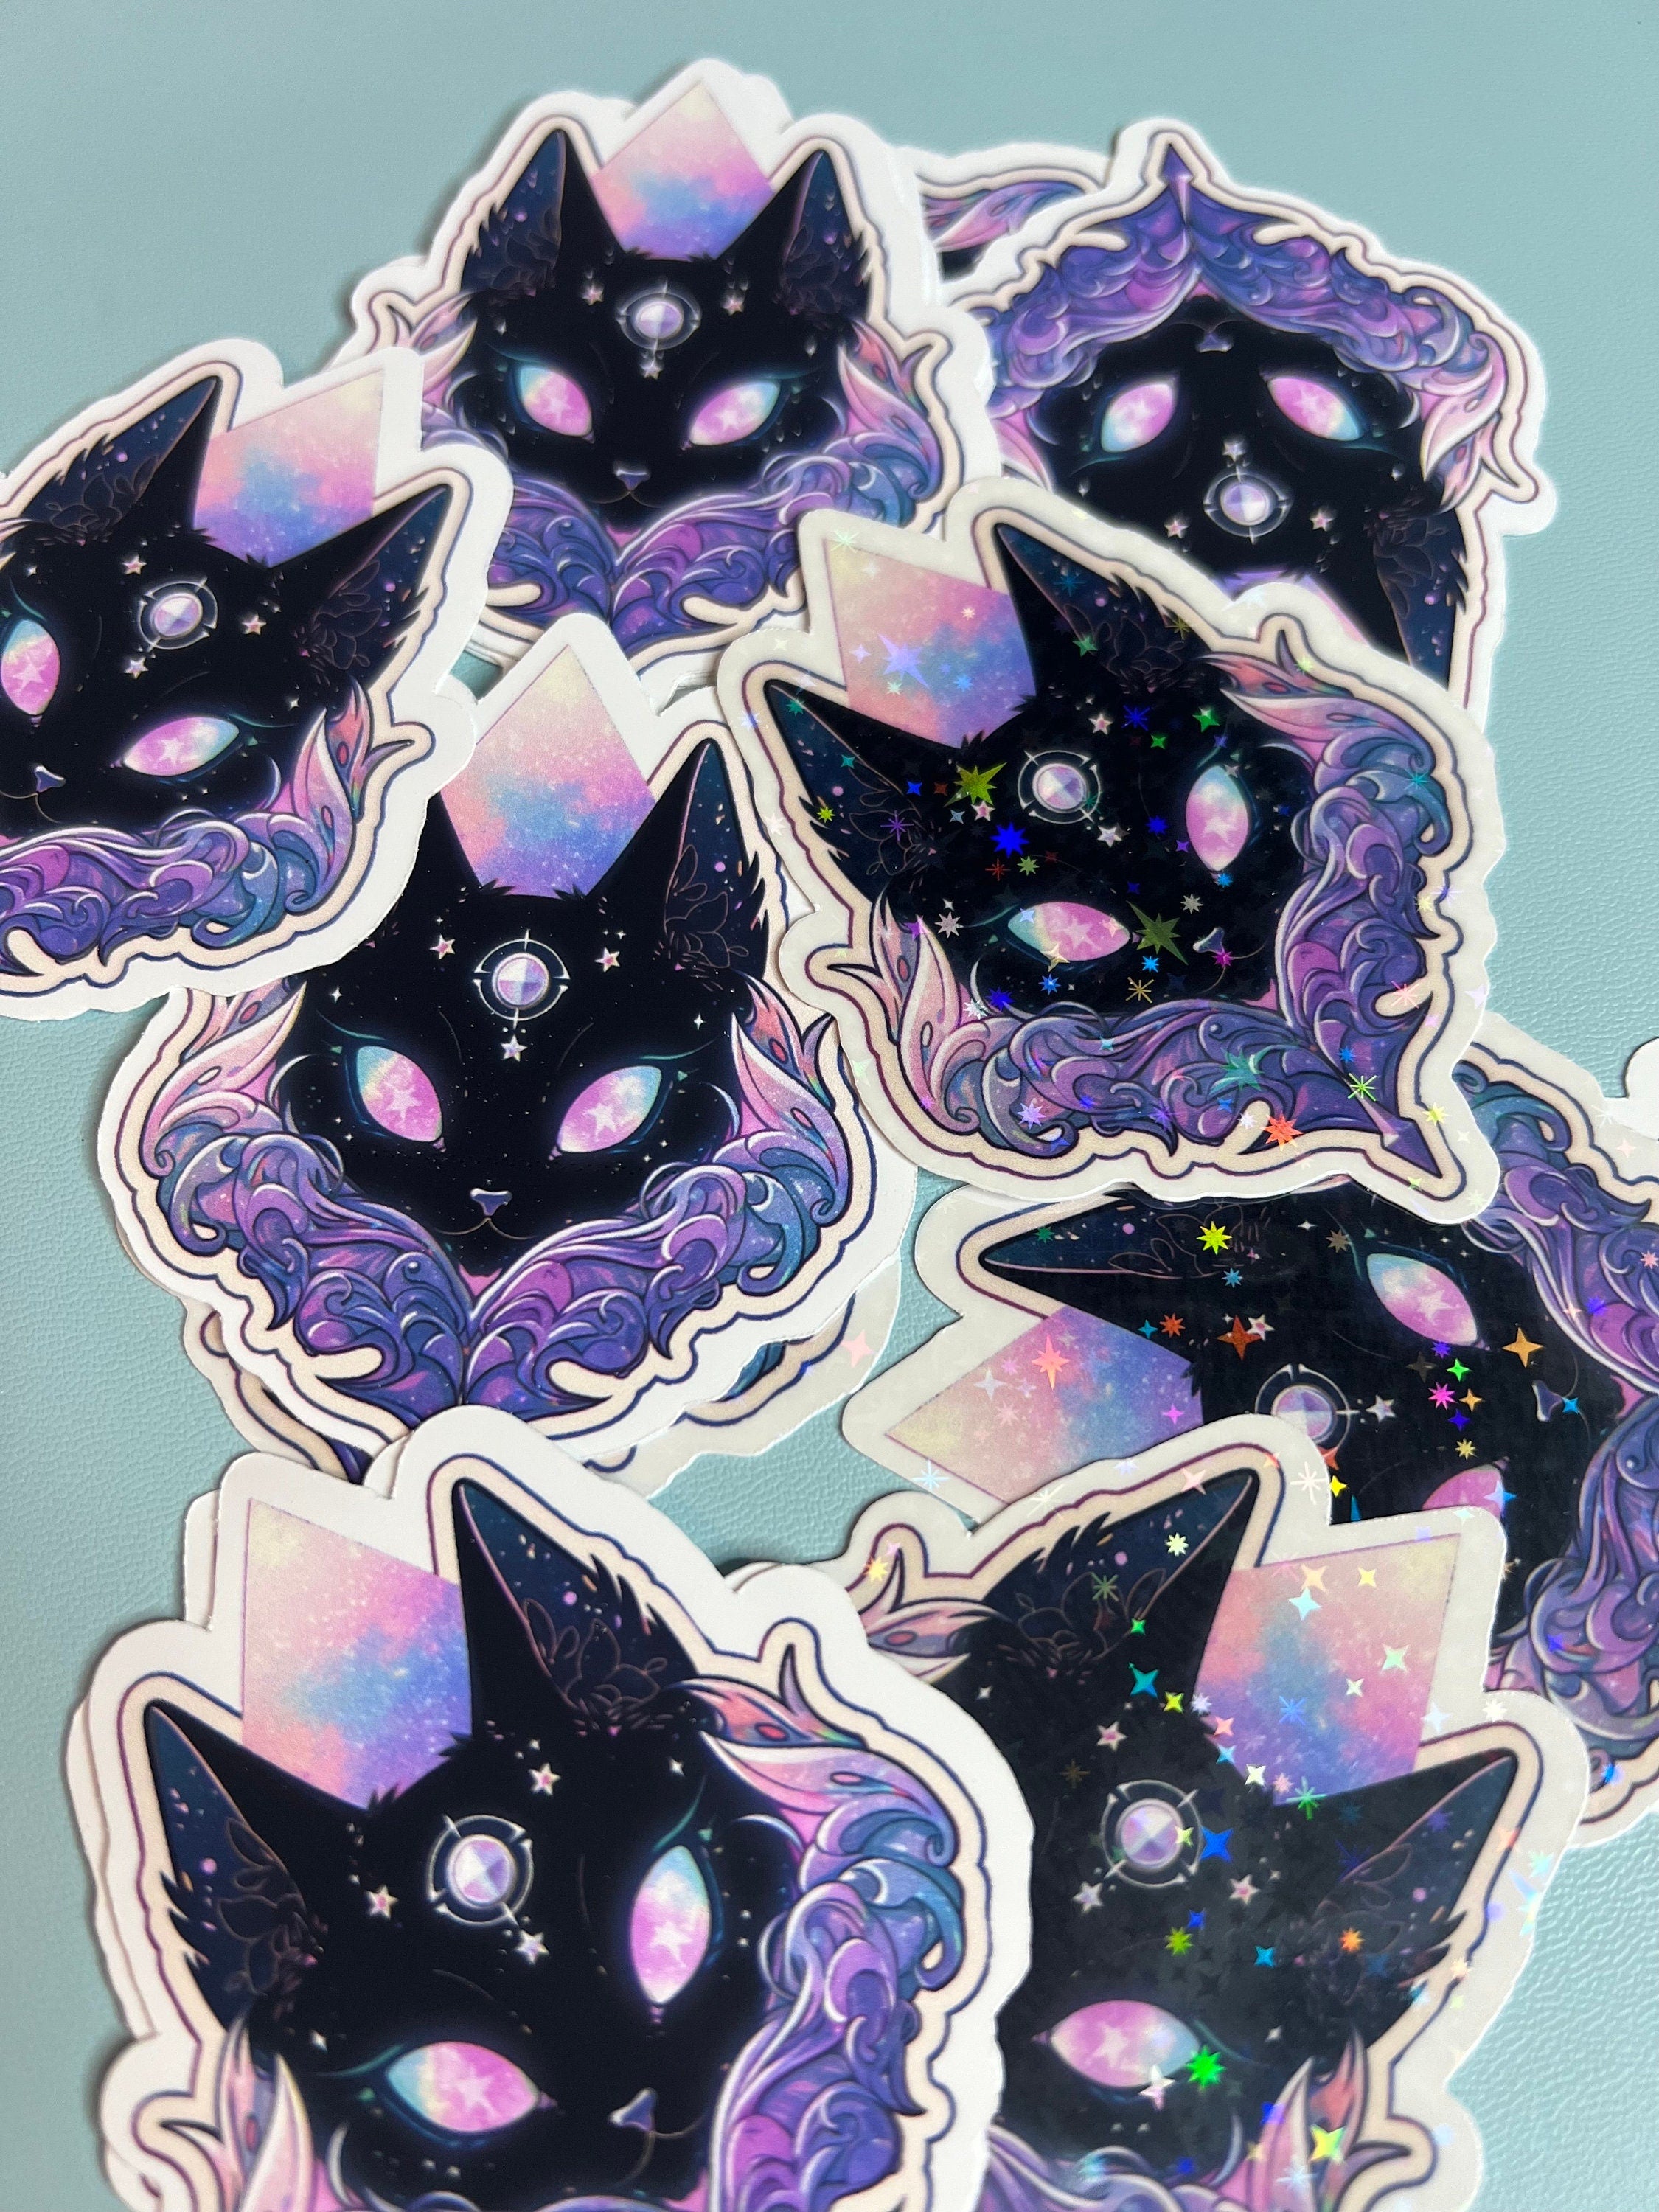 Celestial Cat Holographic Sticker | Witchy Sticker Cute Girly Spiritual Sticker for Notebook, Laptop, Phone, IPad Kindle, Kawaii, Tarot